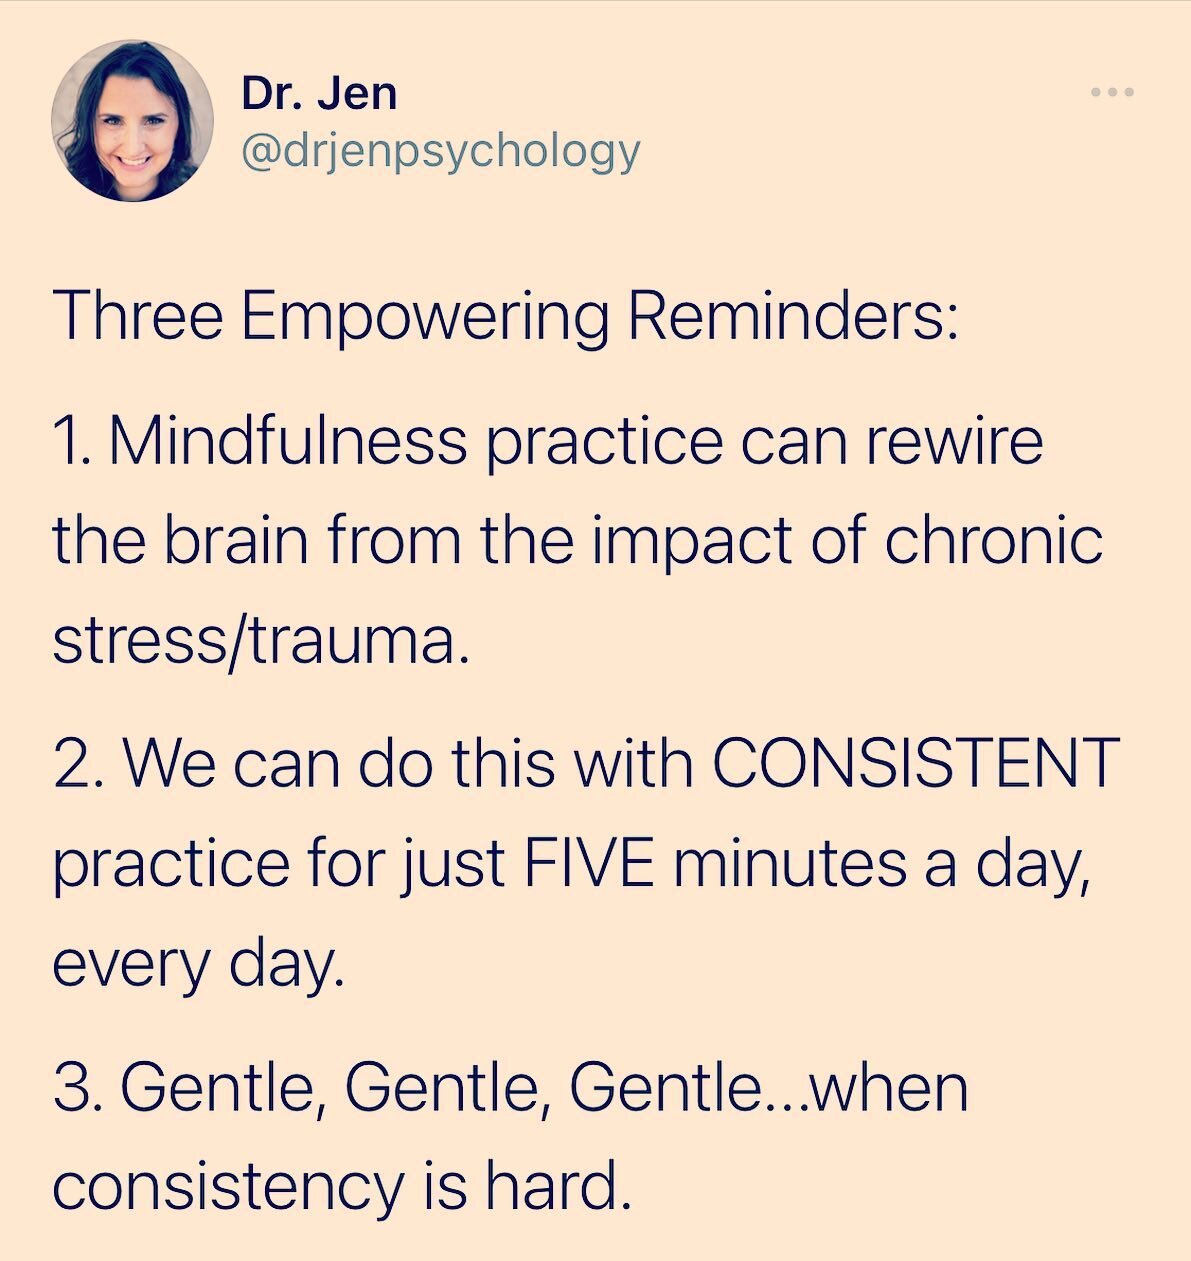 Follow @drjenpsych_ for more 𝘽𝙧𝙖𝙄𝙣𝙨𝙥𝙞𝙧𝙚𝙙 posts 💕🧠

Practice makes neuroplastic.
Practice makes practice. 
Practice makes present. 

Can we take FIVE minutes today to pay attention:
ON PURPOSE. 
IN THE PRESENT MOMENT 
and WITHOUT JUDGEMEN